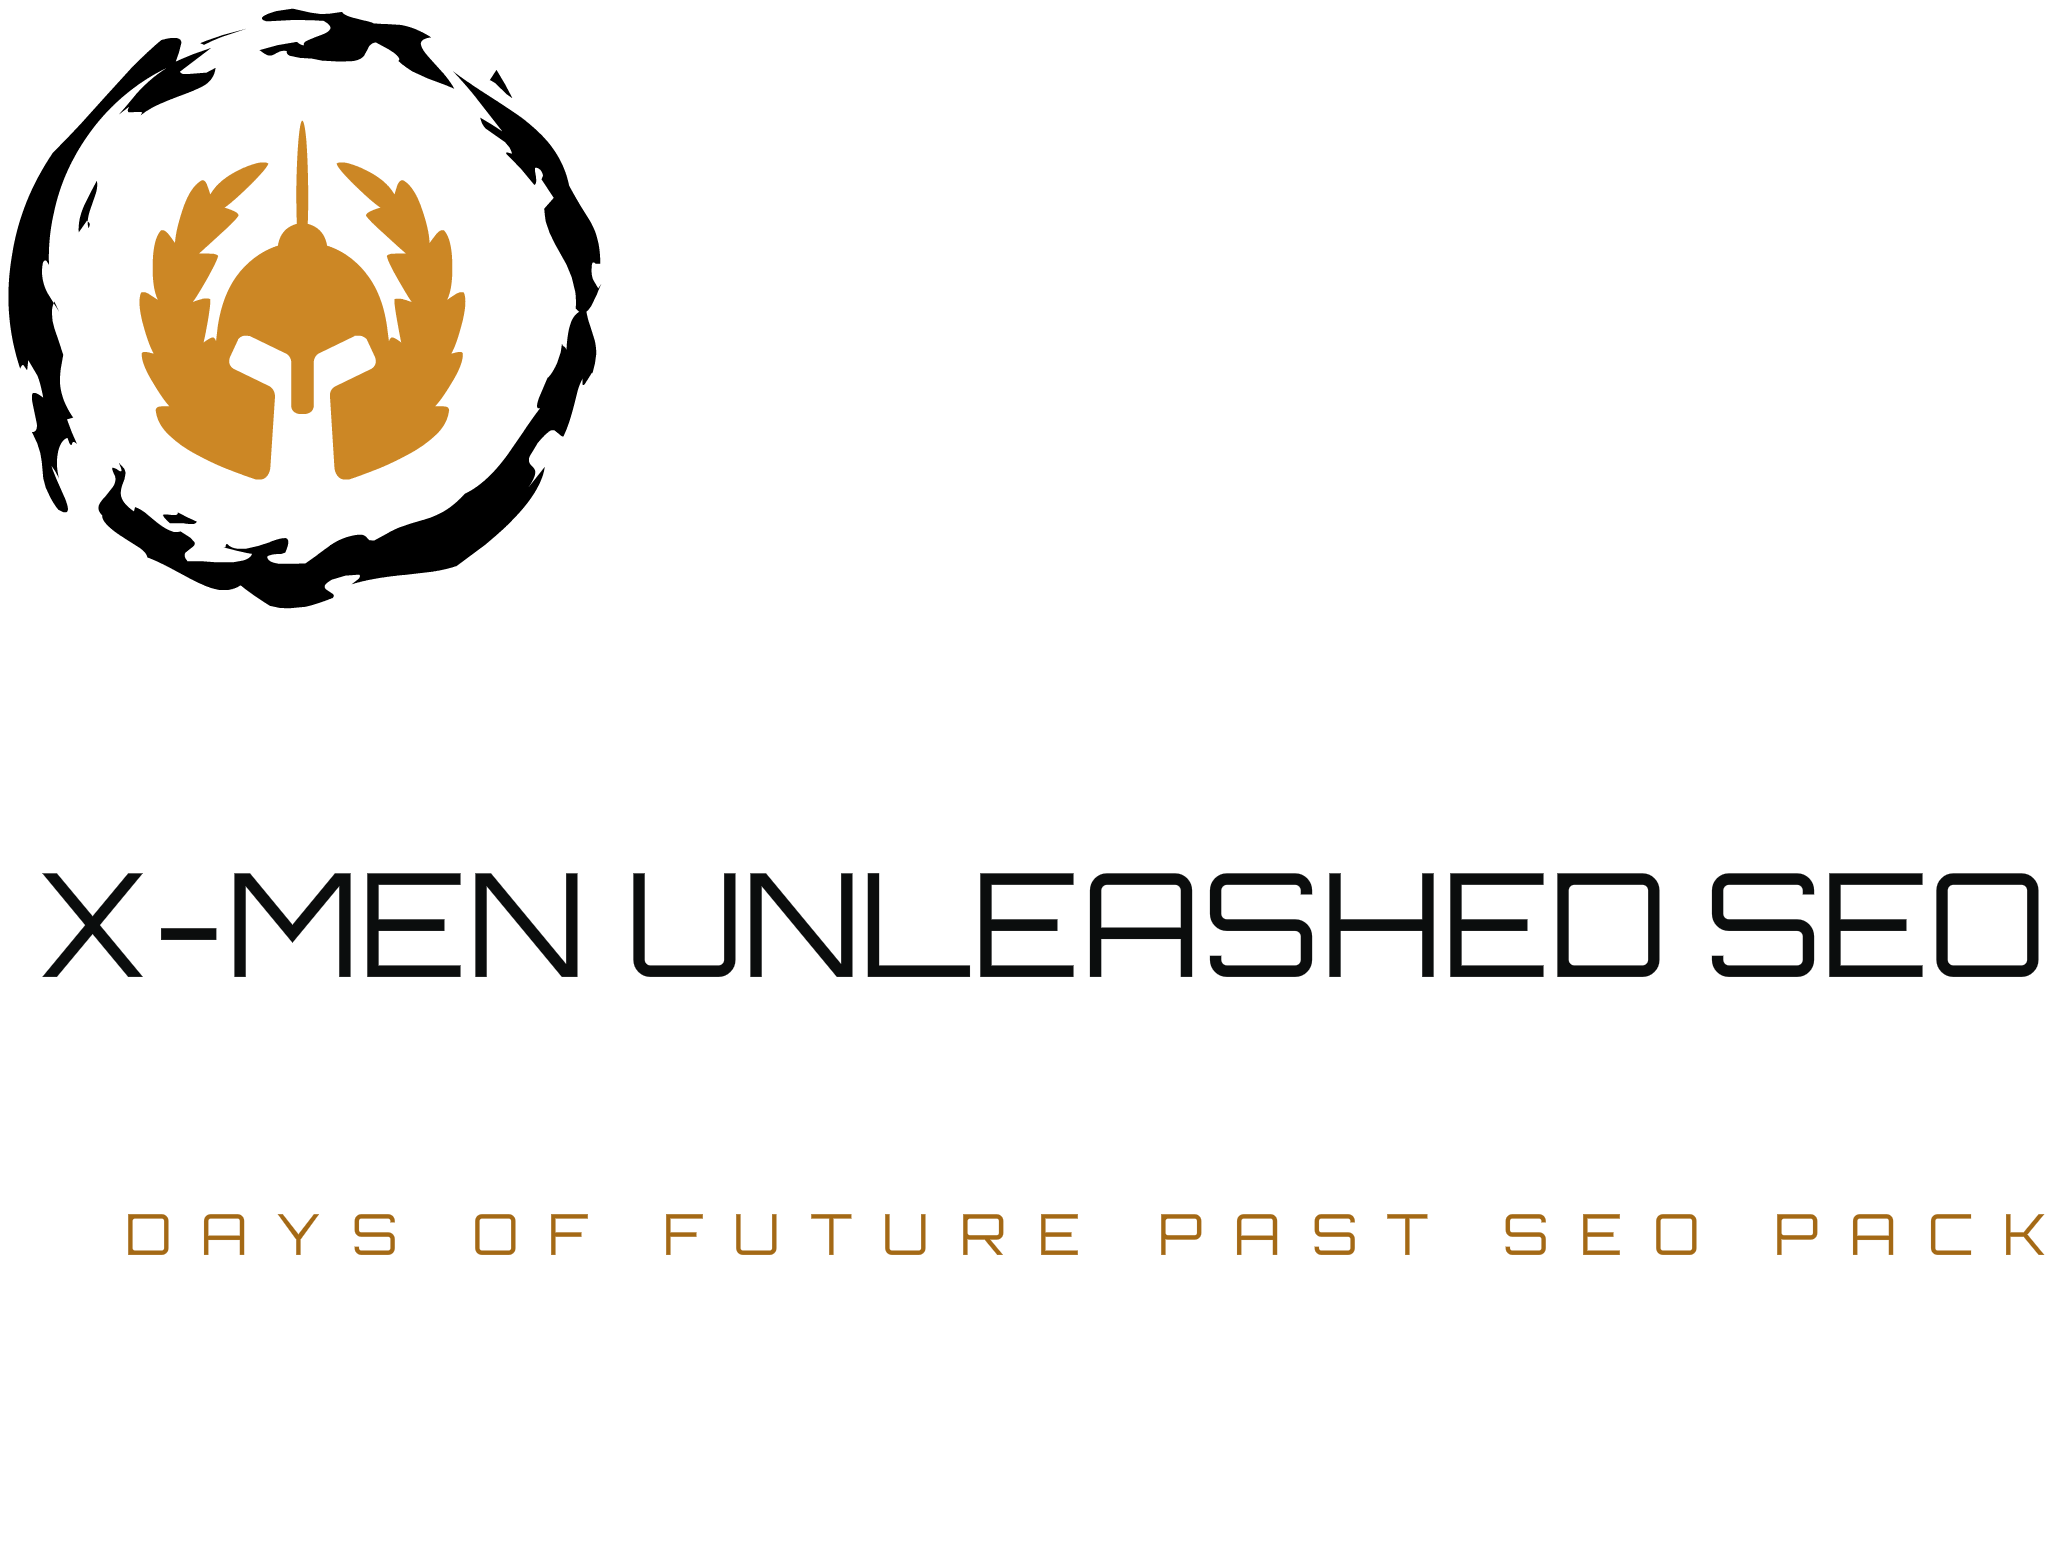 DAYS OF FUTURE PAST SEO PACK